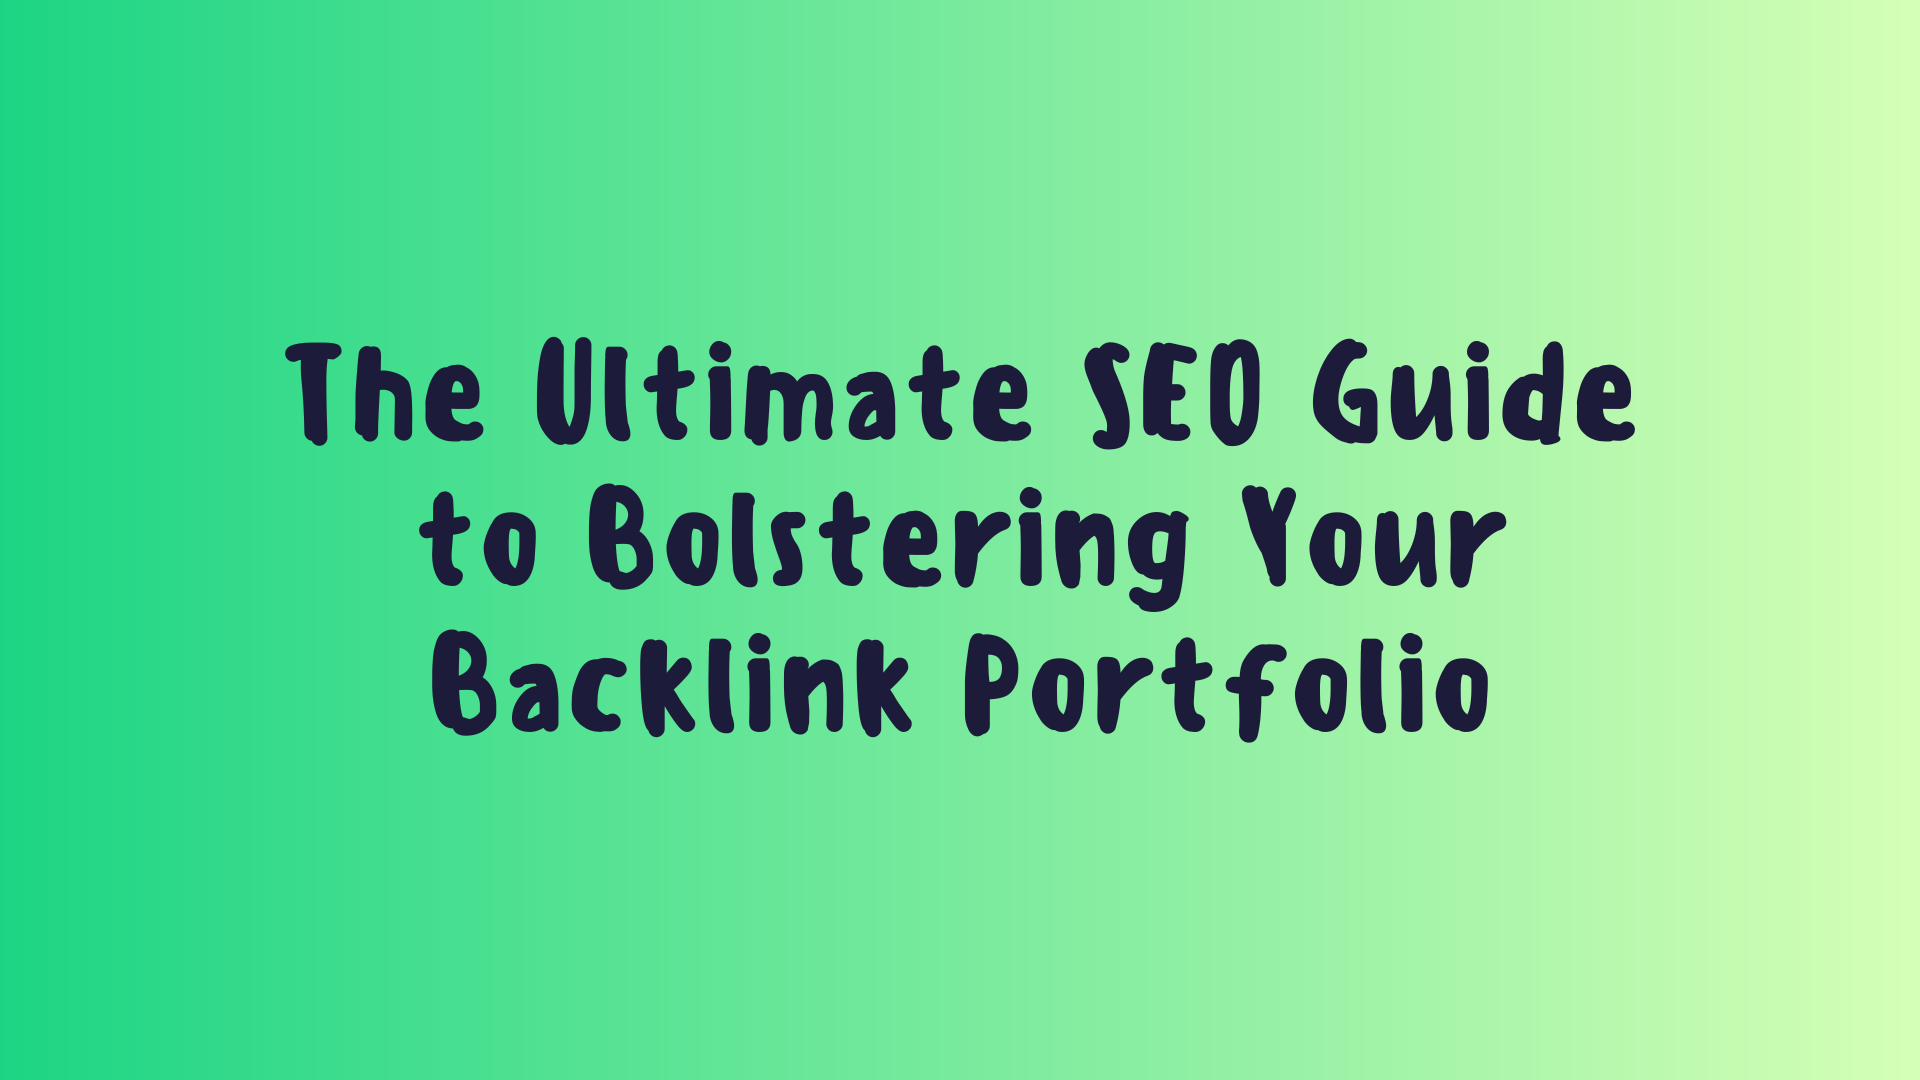 The Ultimate SEO Guide to Bolstering Your Backlink Portfolio